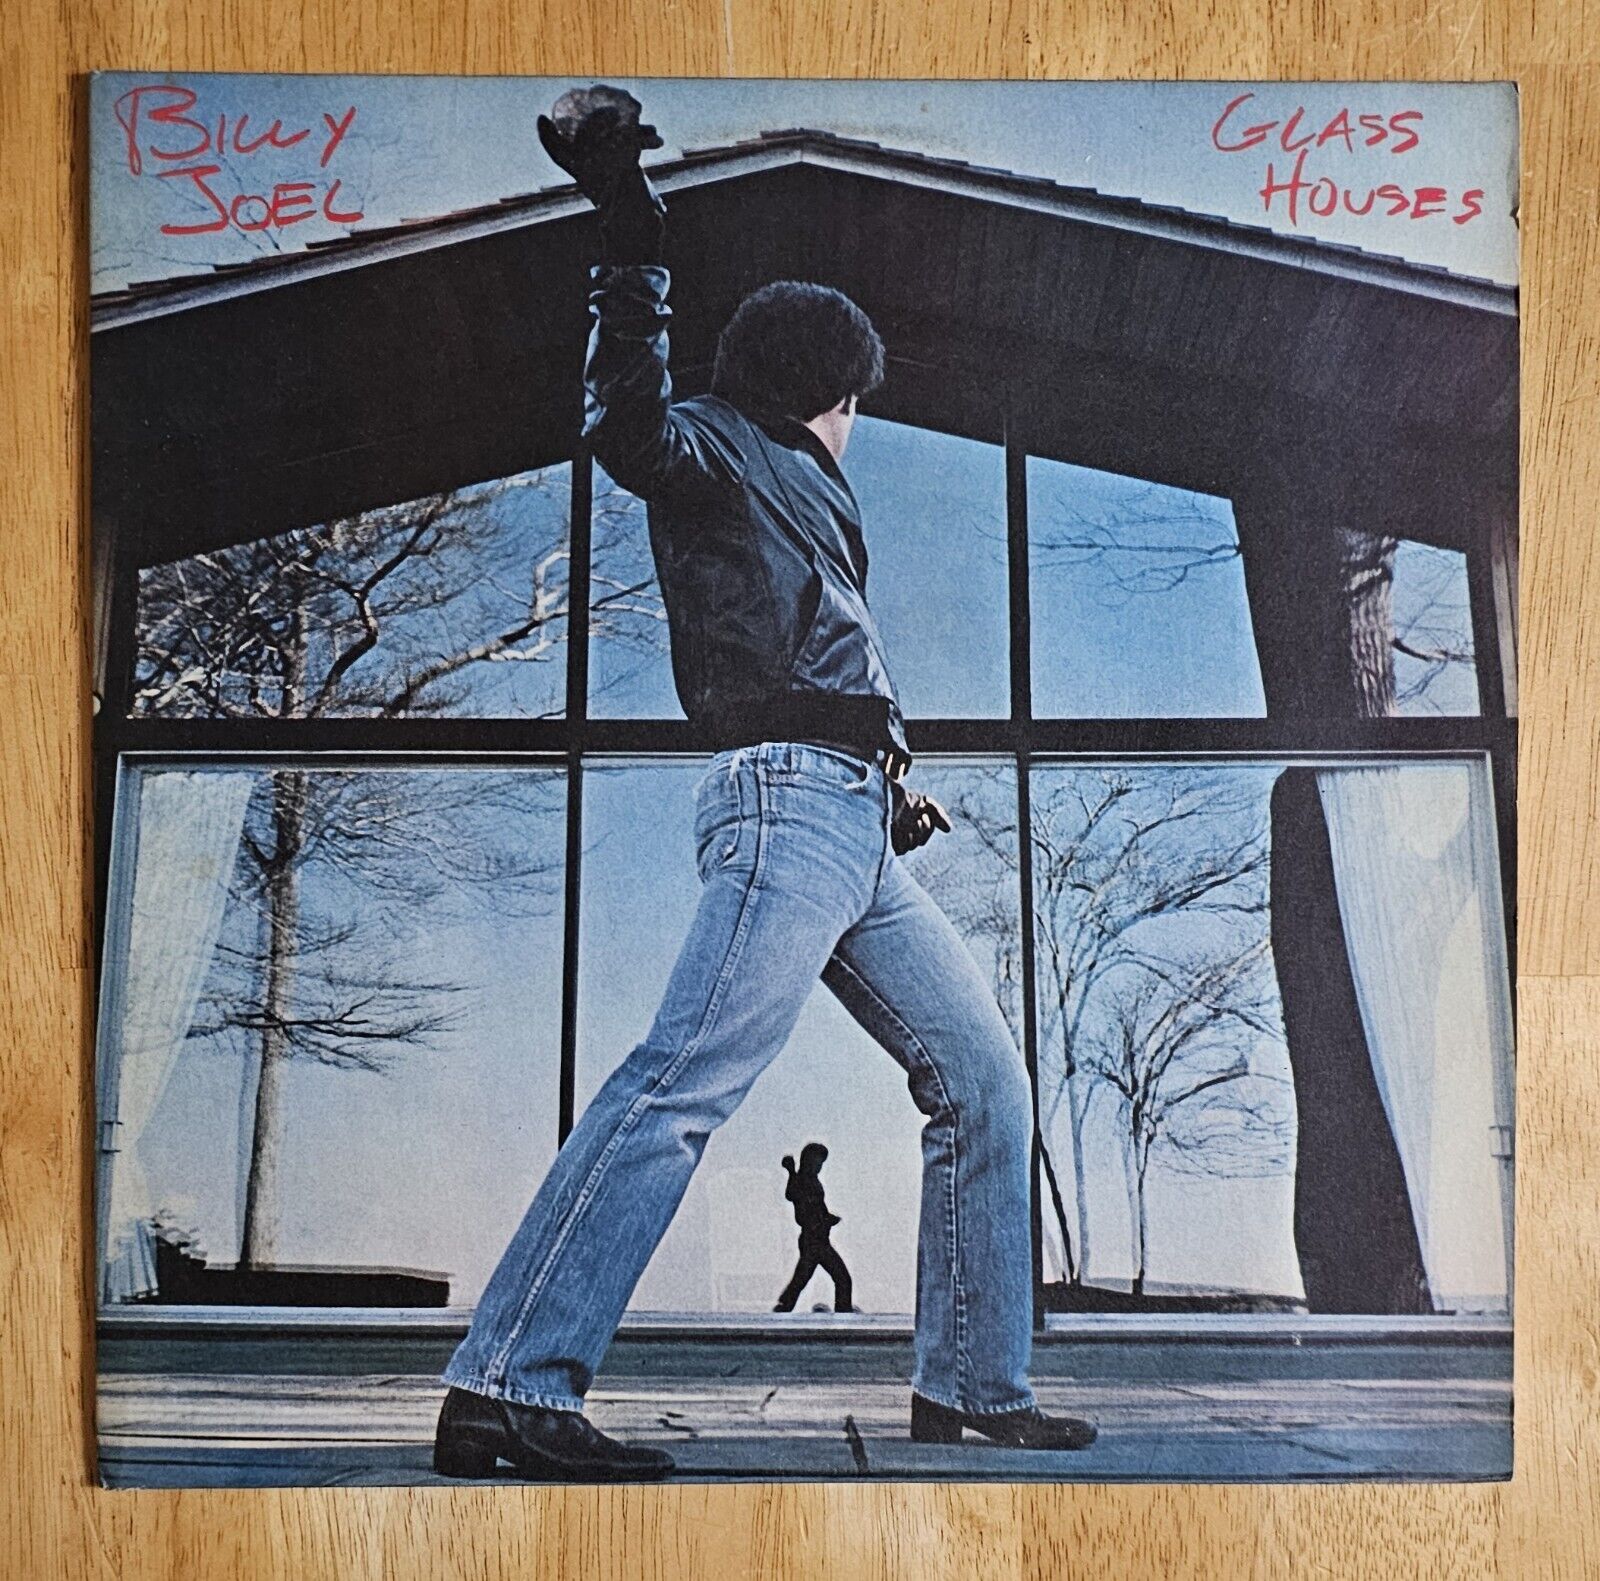 Billy Joel  Glass Houses Vinyl LP Record VG+ With Insert  You May Be Right